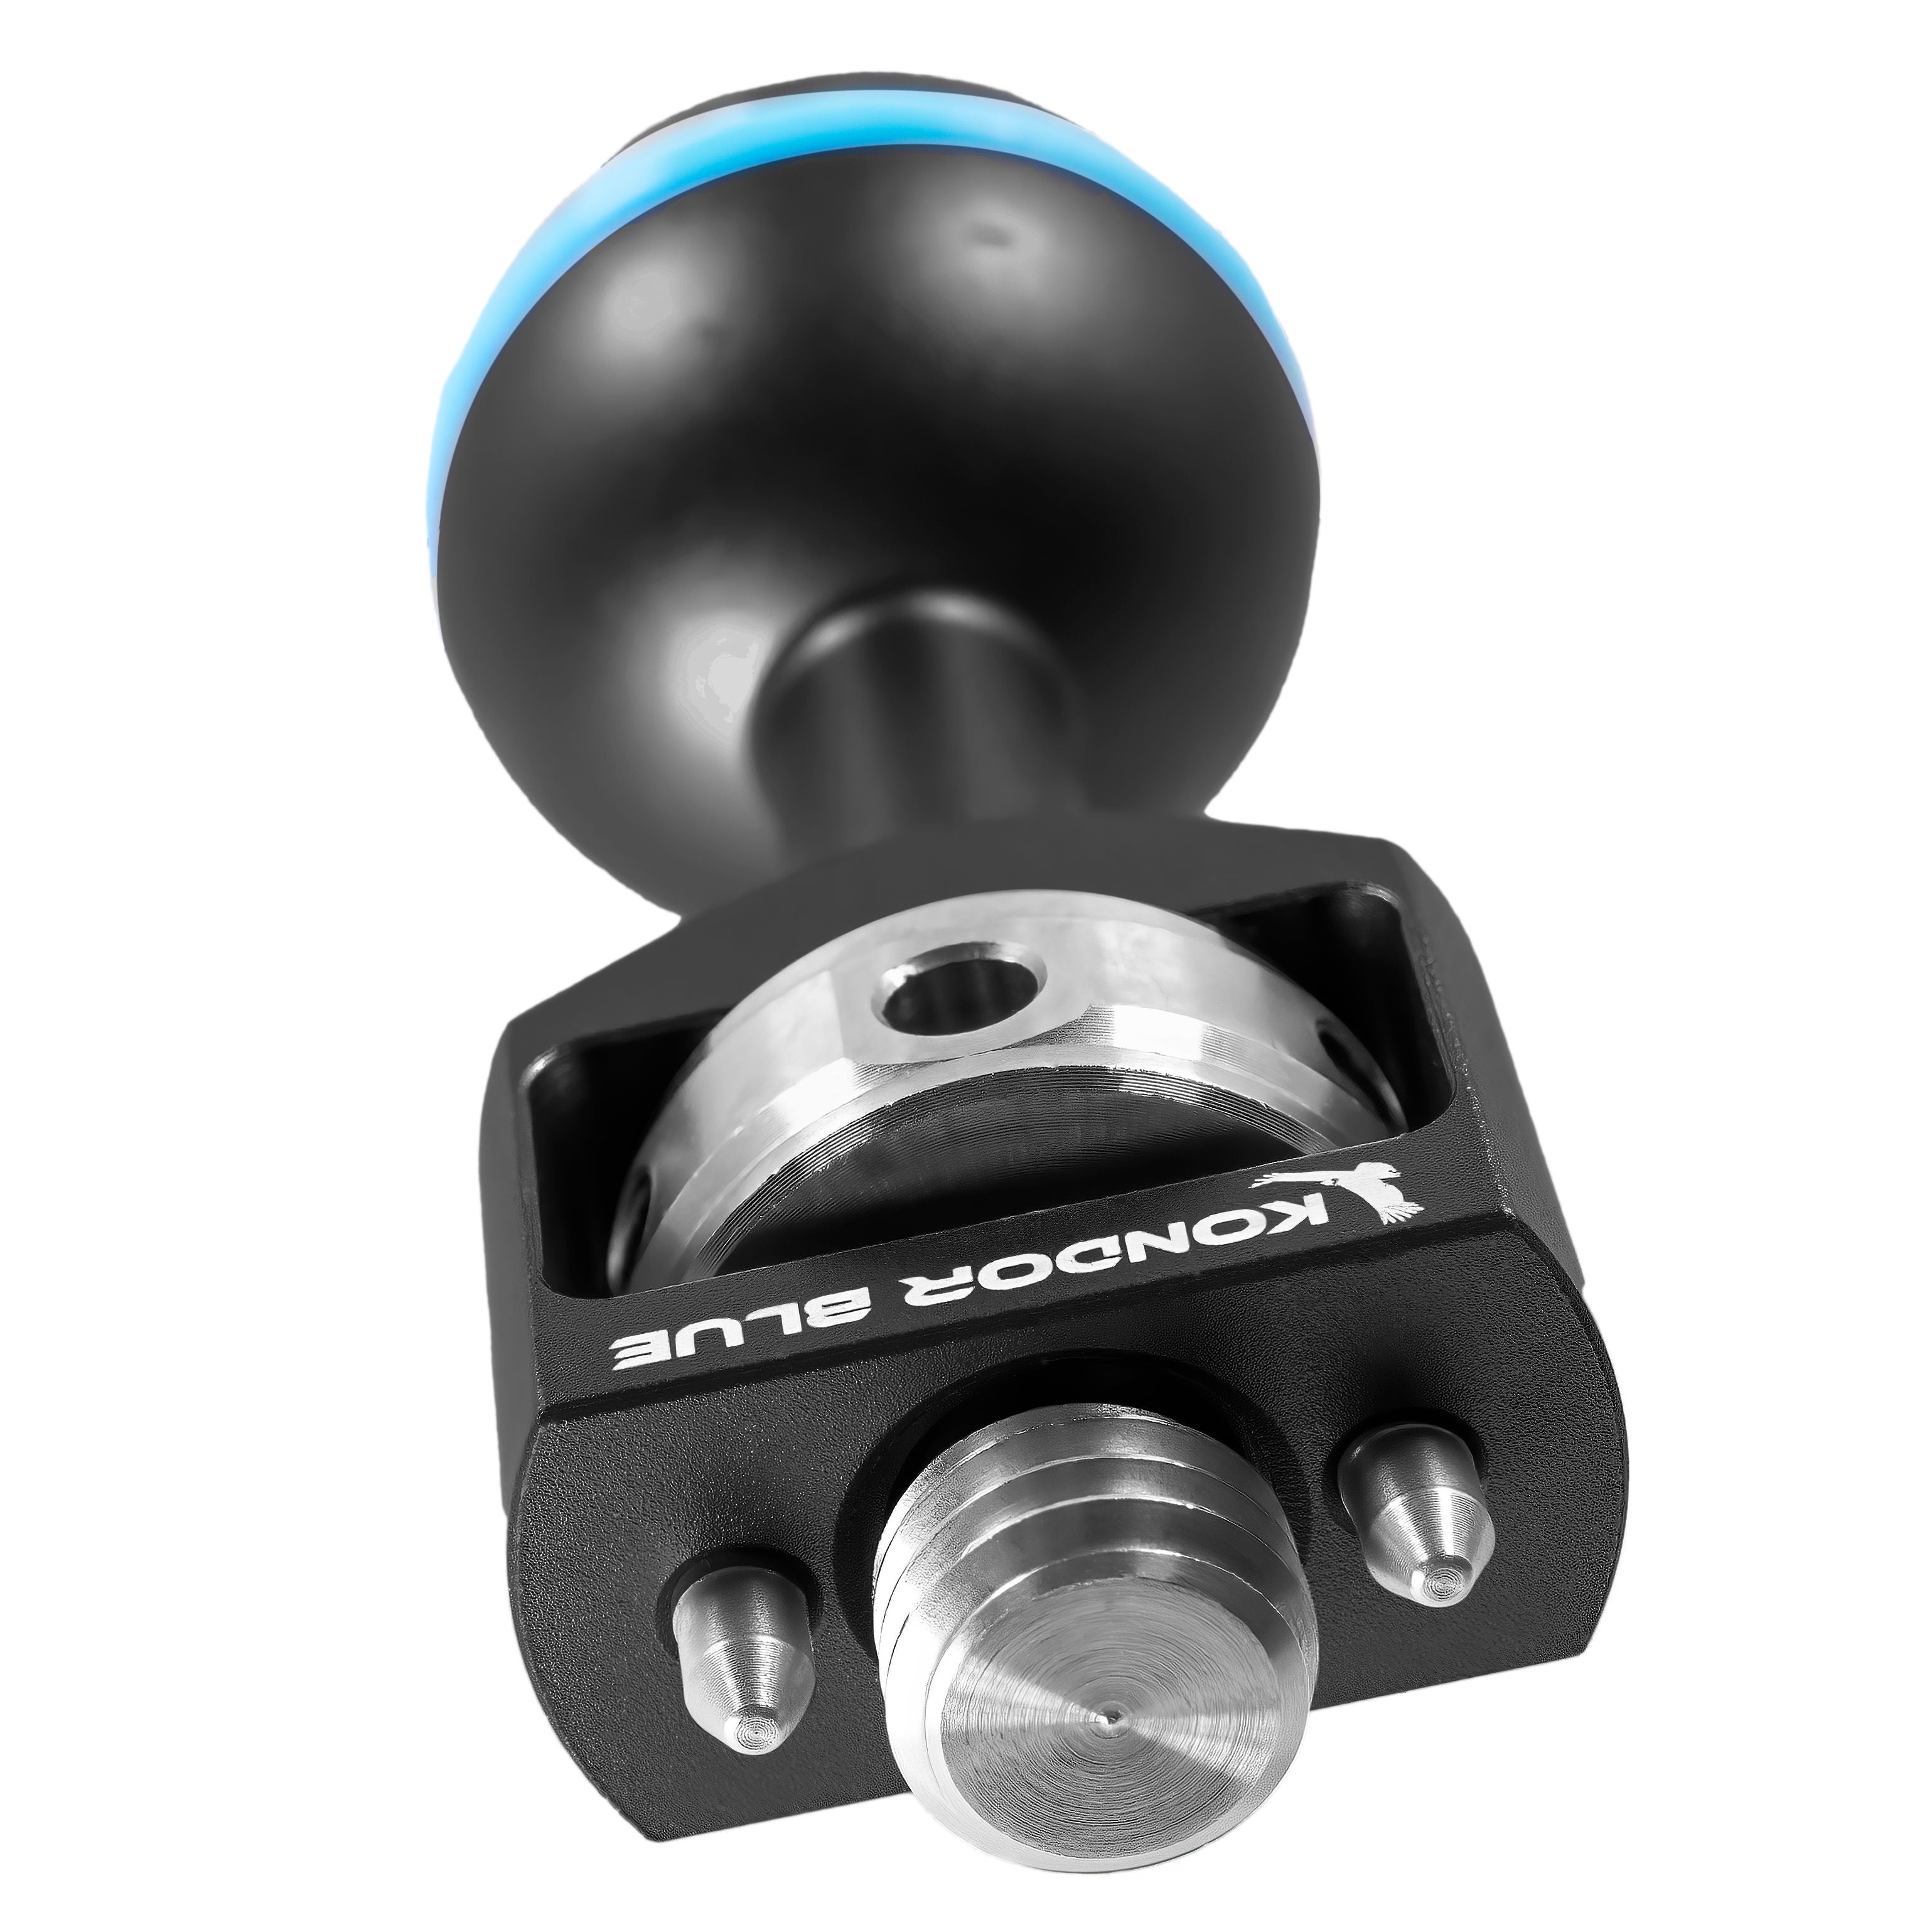 Kondor Blue 3/8" Ball Head with Locating Pins for Magic Arms (Black)